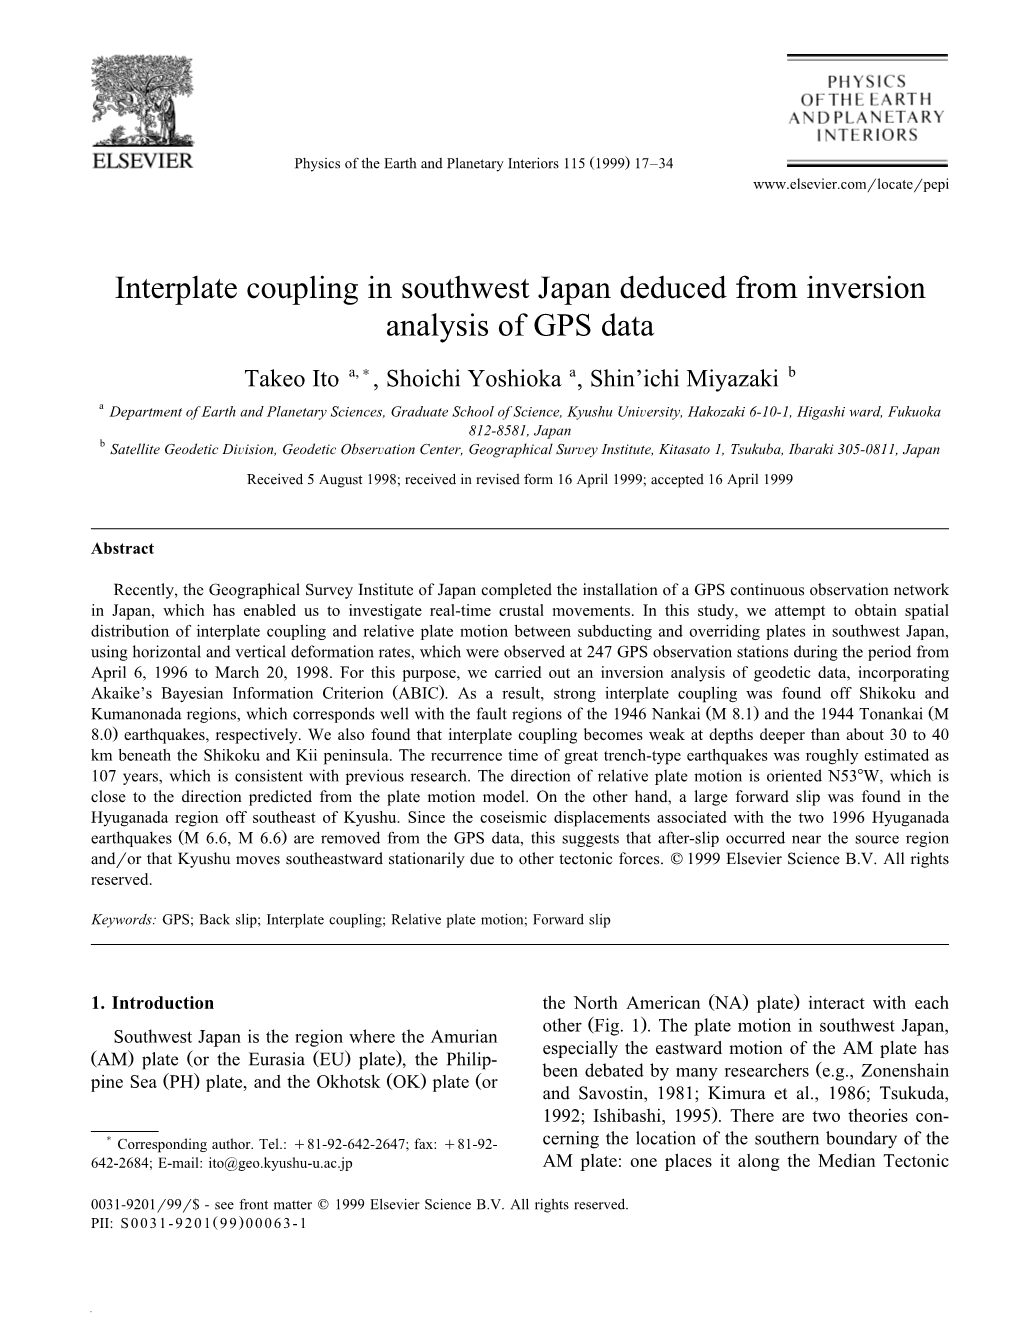 Interplate Coupling in Southwest Japan Deduced from Inversion Analysis of GPS Data